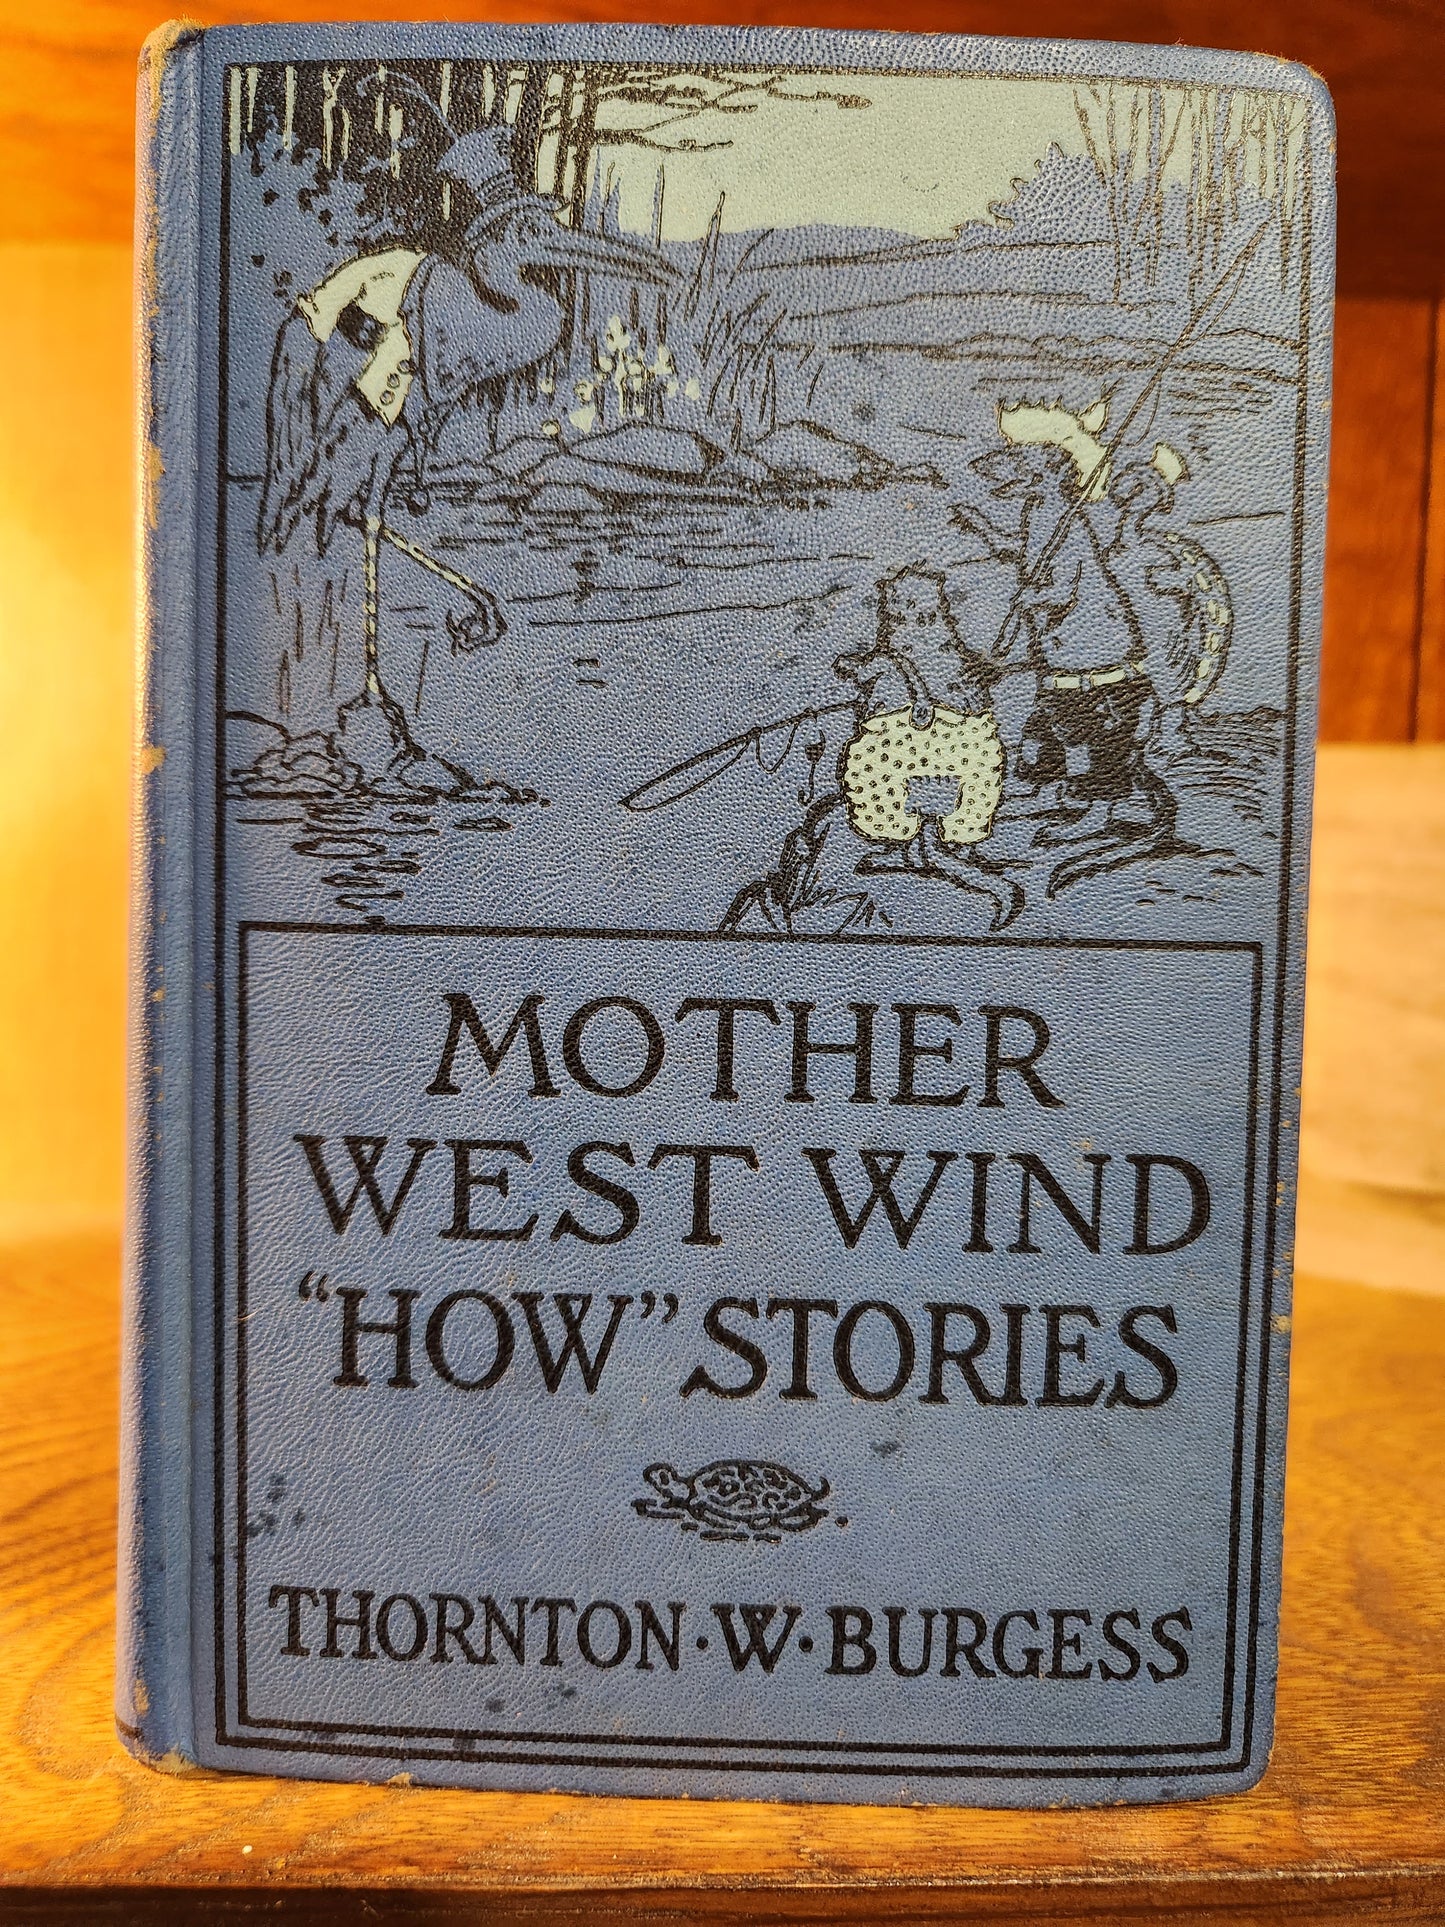 "Mother West Wind 'How' Stories" by Thornton W. Burgess